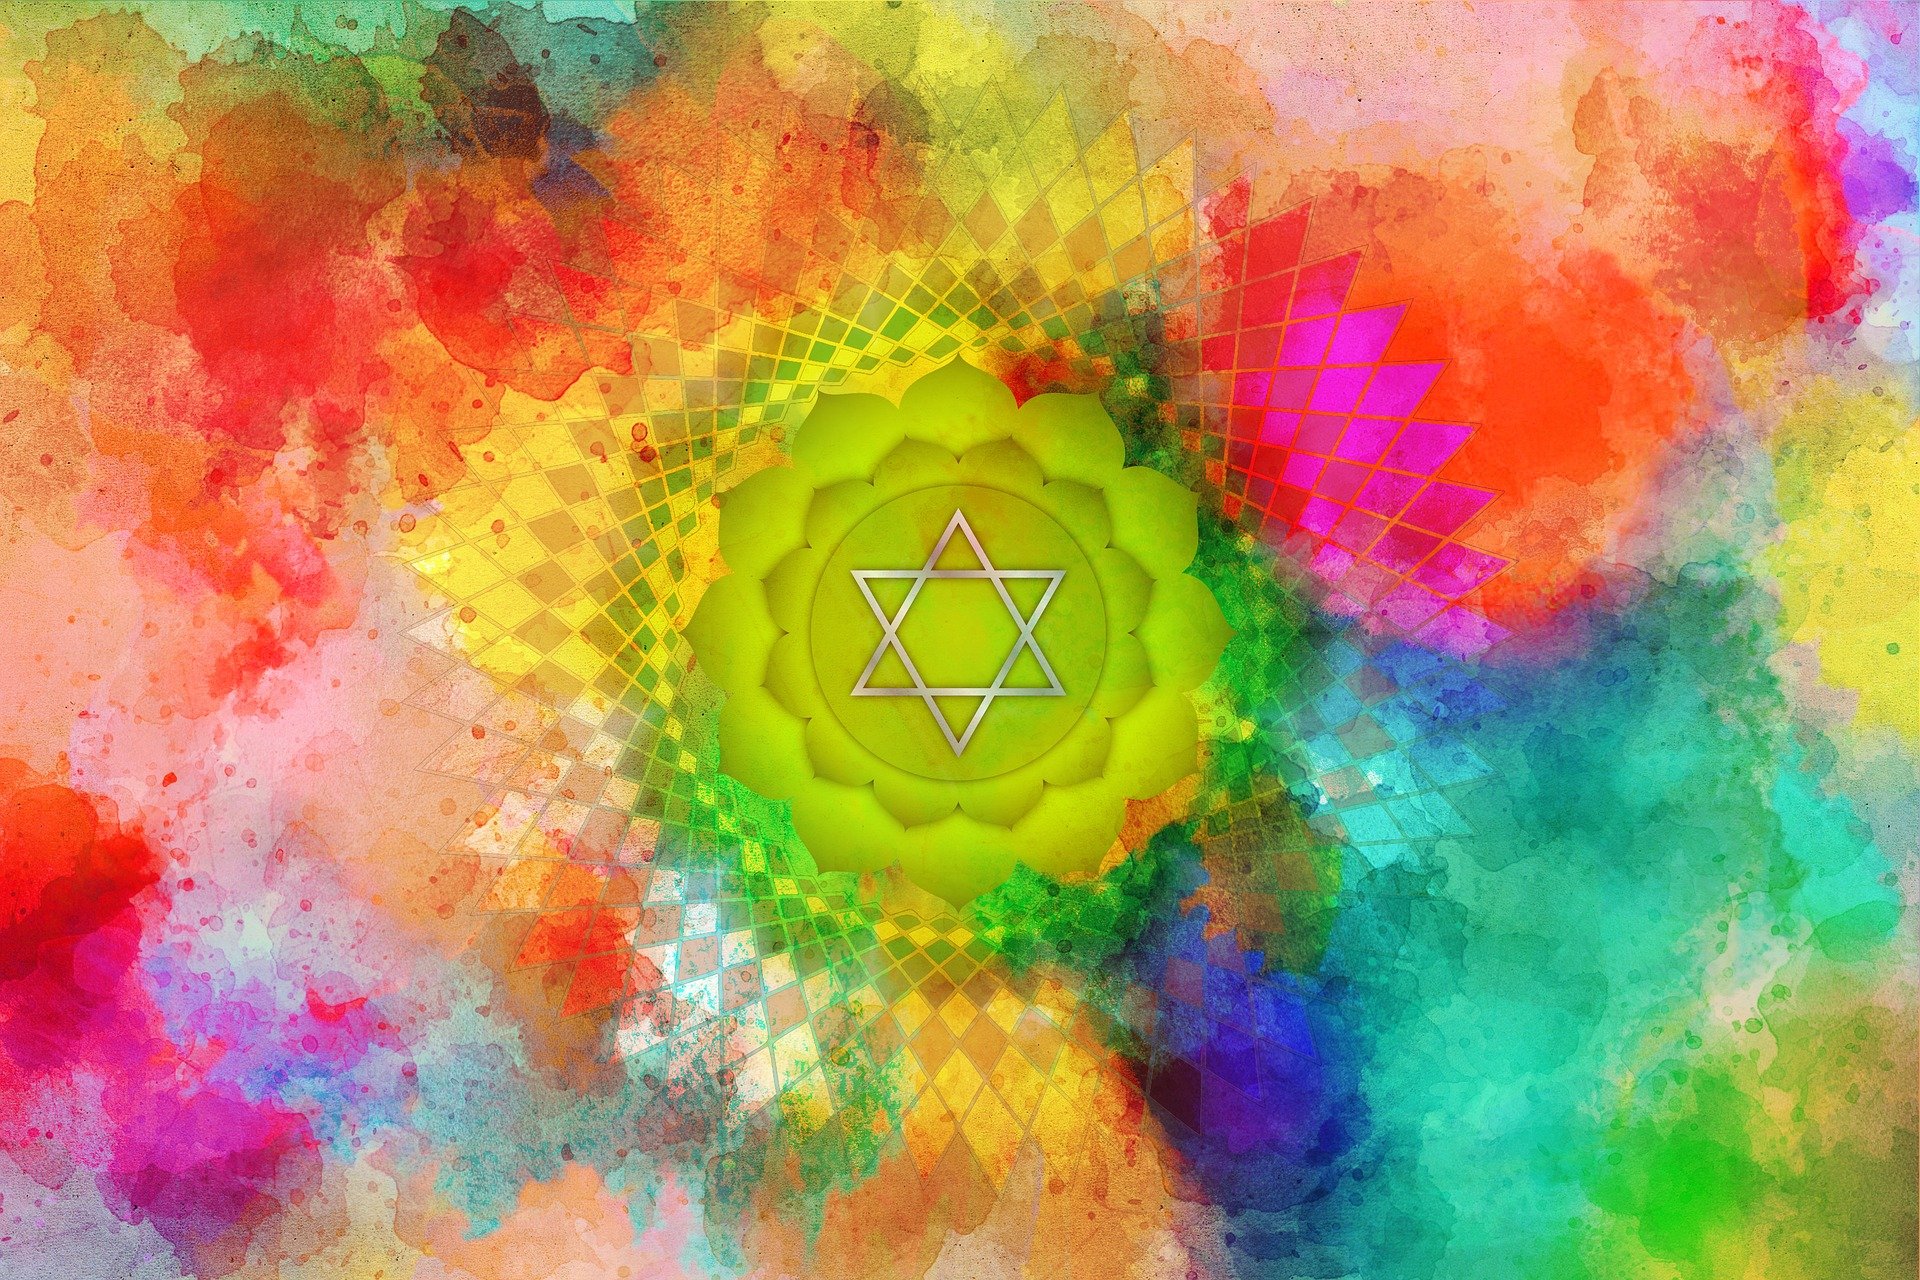 A colorful painting of the anahata symbol.